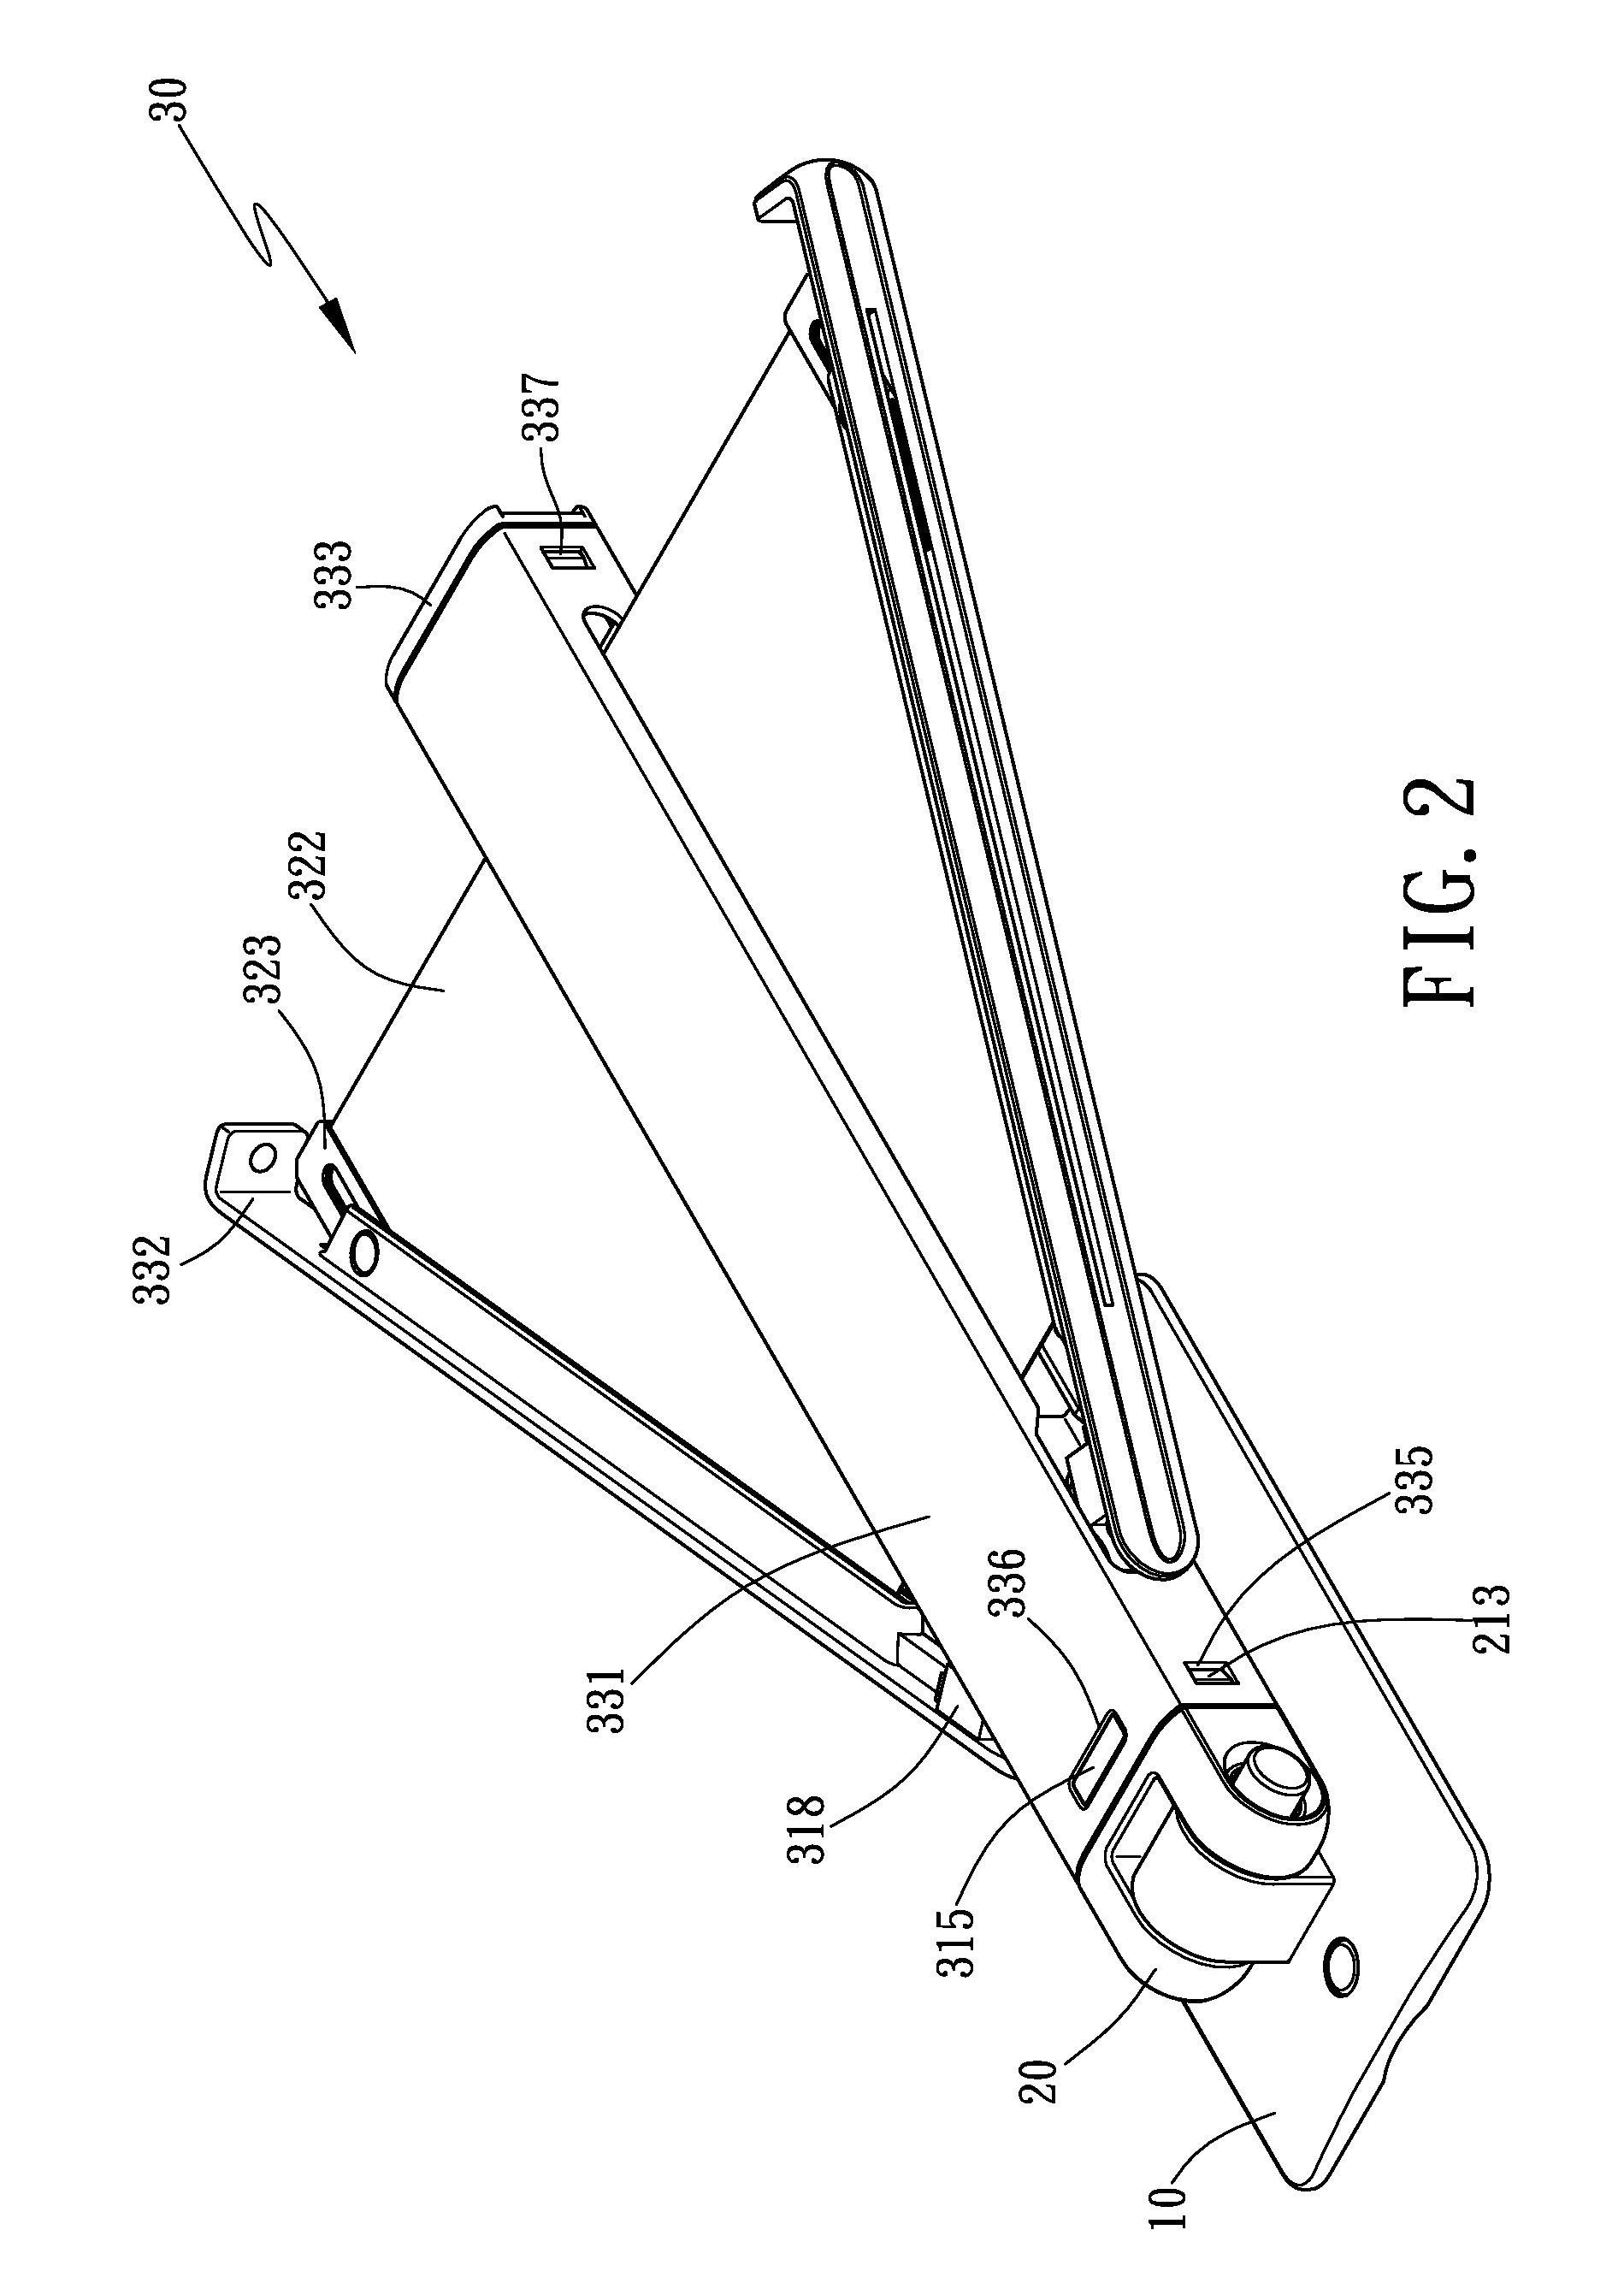 Double wing bicycle fender